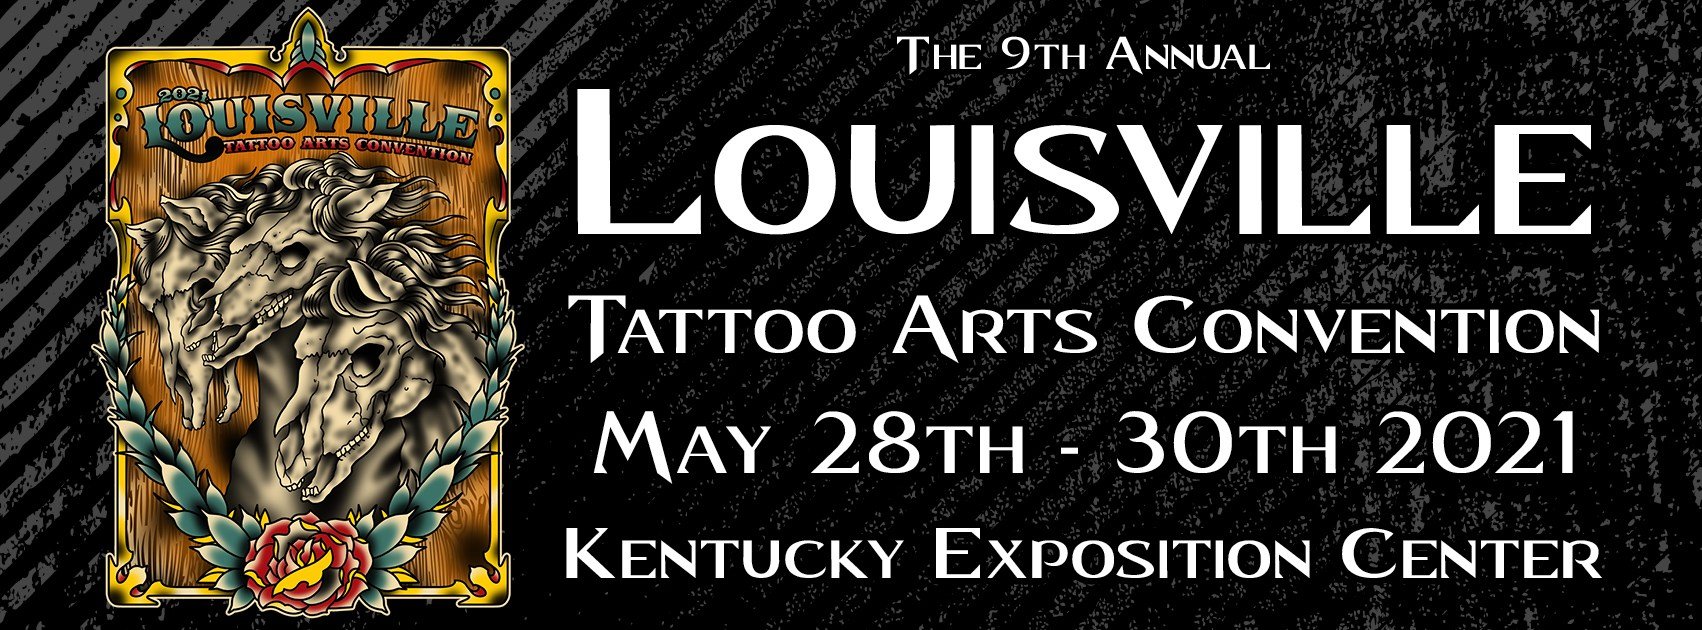 9th Louisville Tattoo Arts Convention 28 30 May 2021